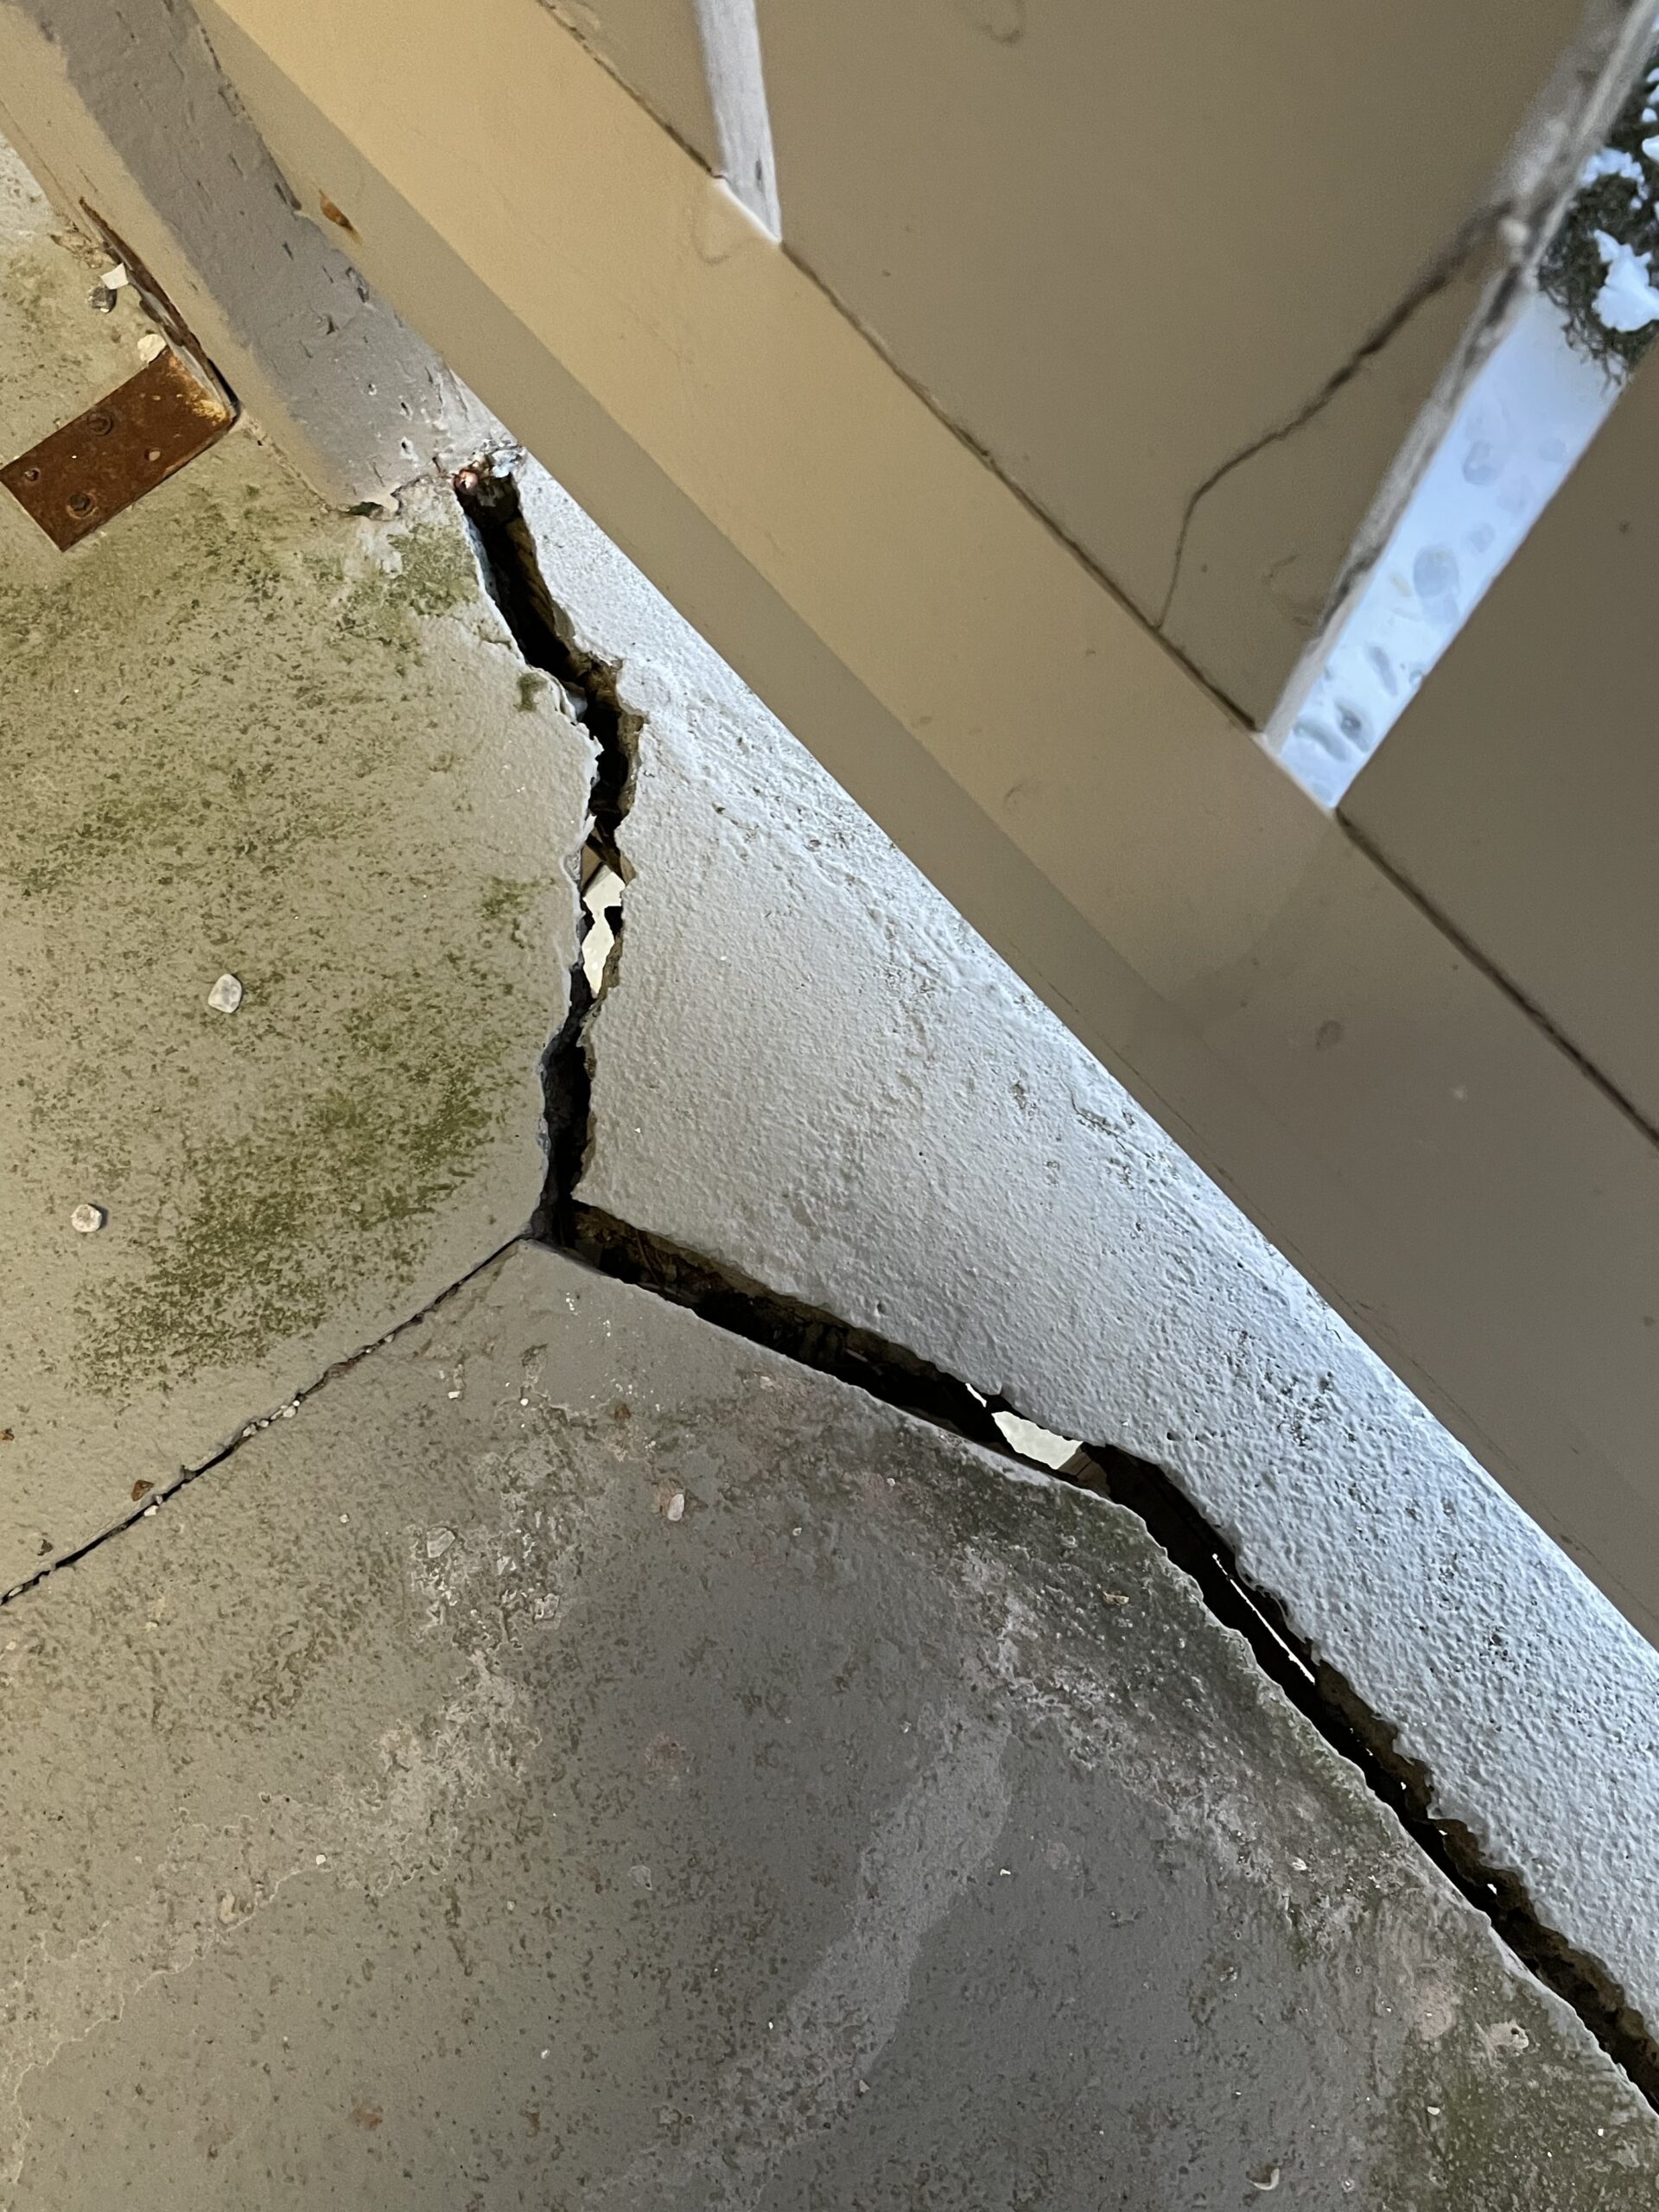 A crack in the cement of a balcony